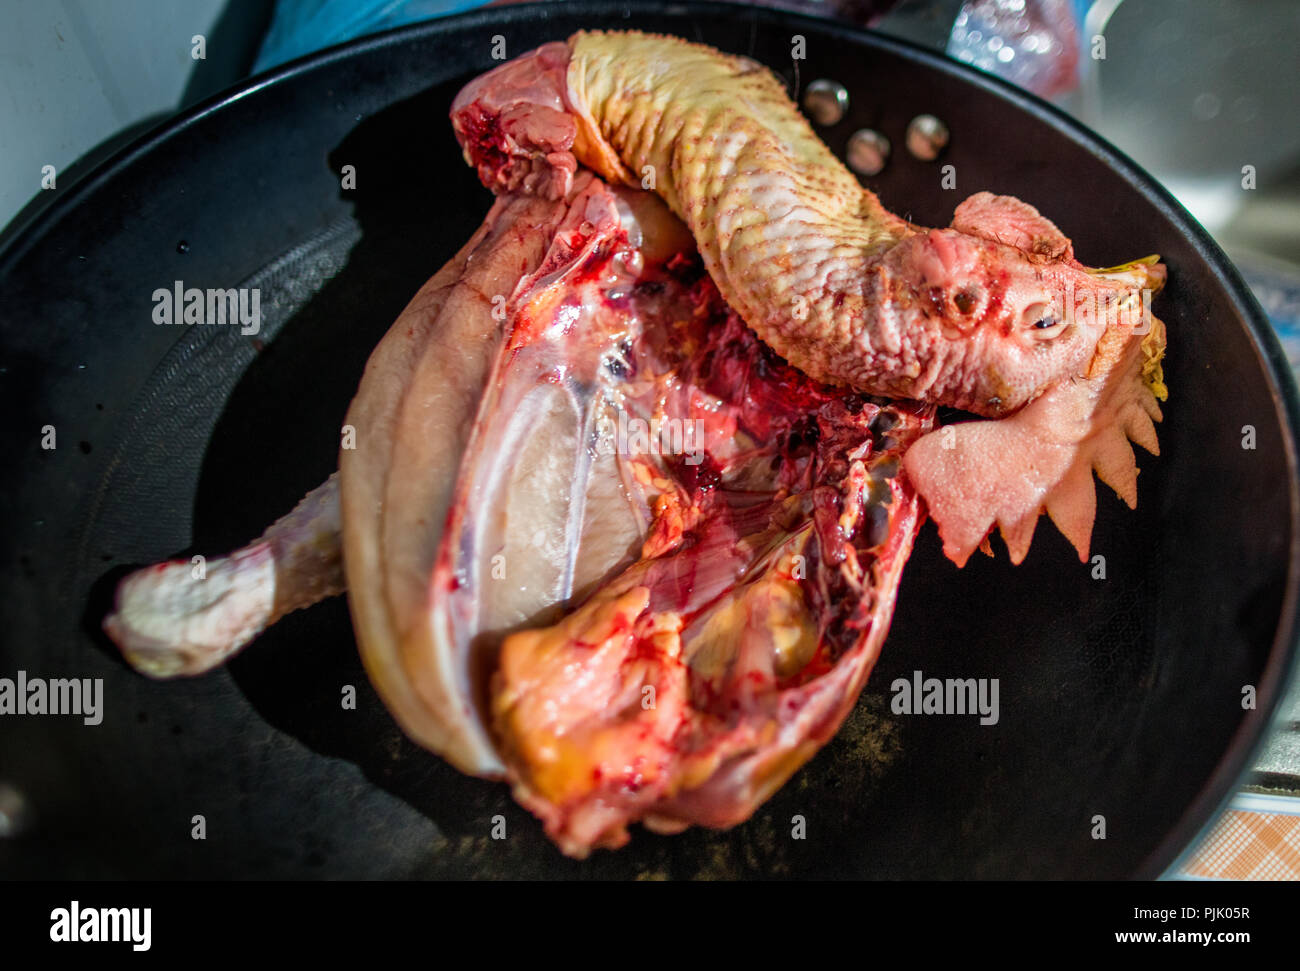 Freshly slaughtered chicken being prepared for dinner, in a skillet, in rural Vietnam. Lao Can, Sapa, Vietnam. Stock Photo